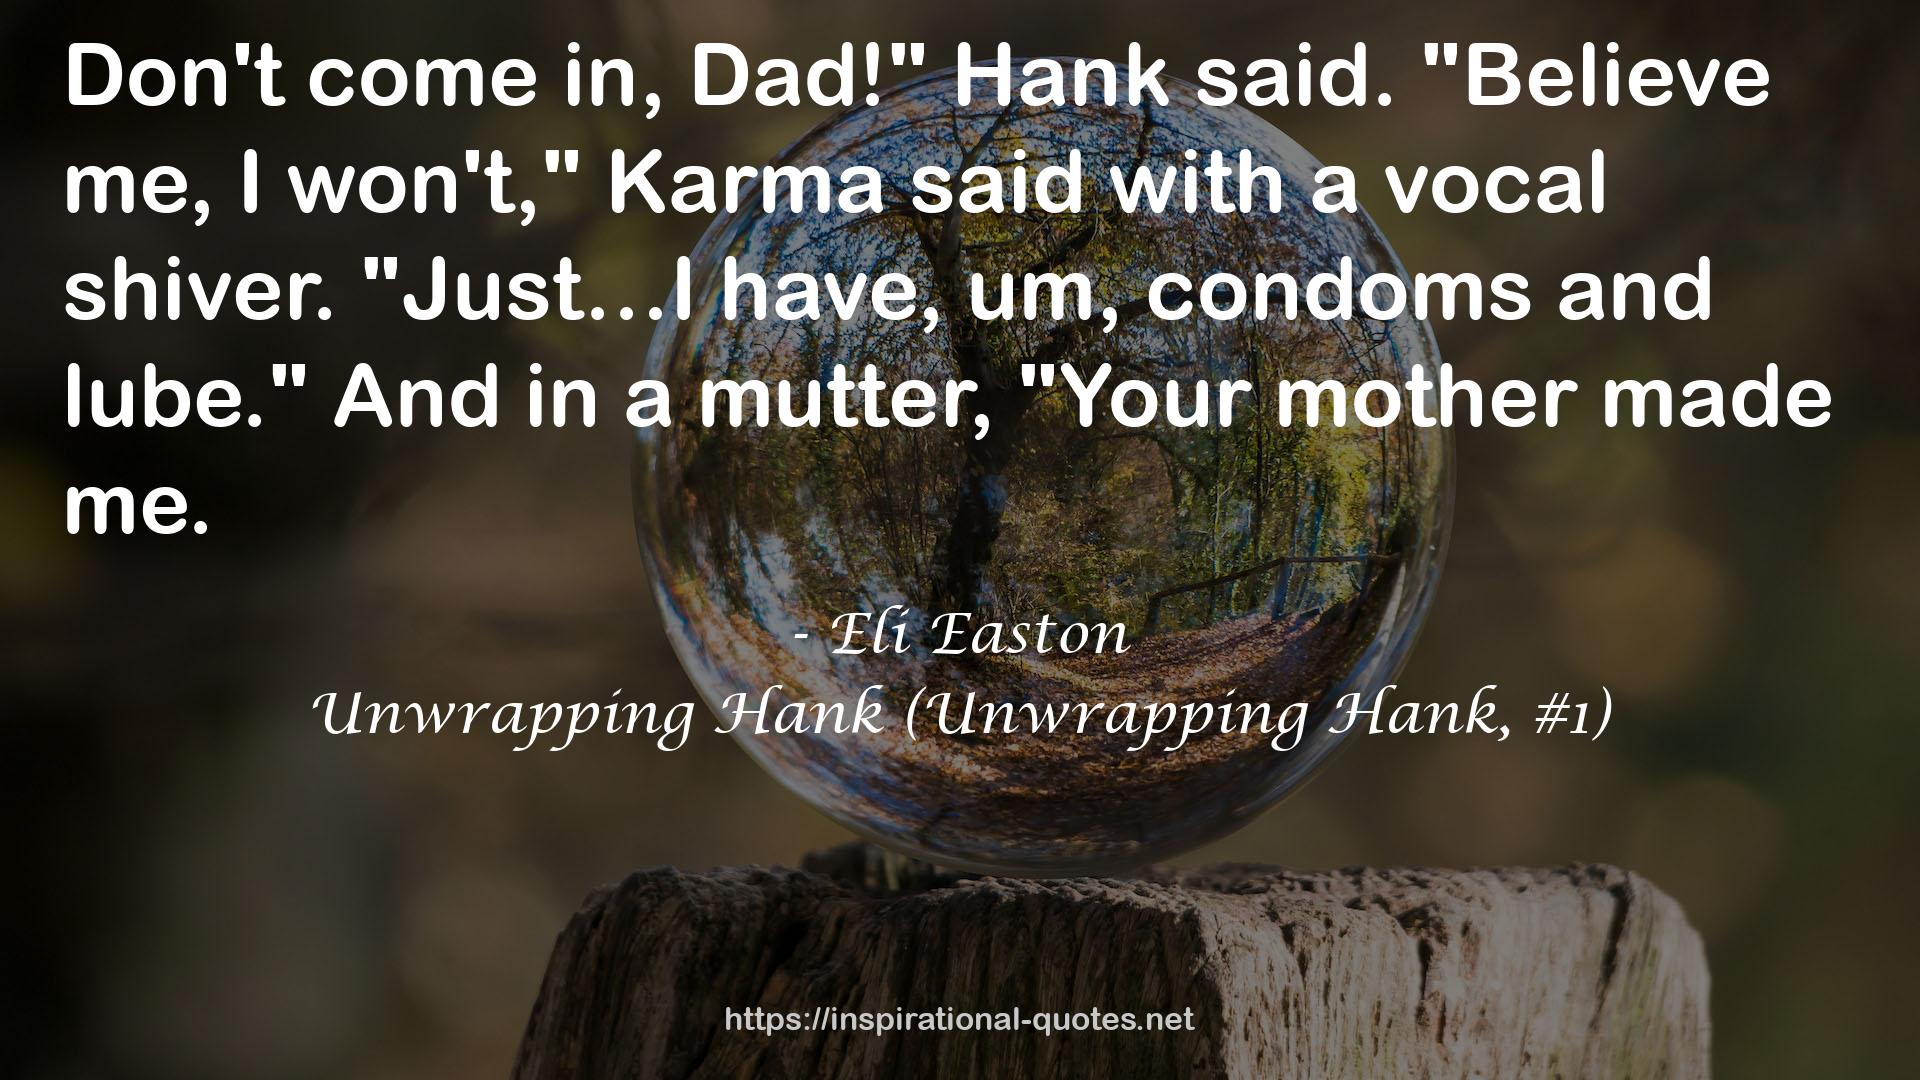 Unwrapping Hank (Unwrapping Hank, #1) QUOTES